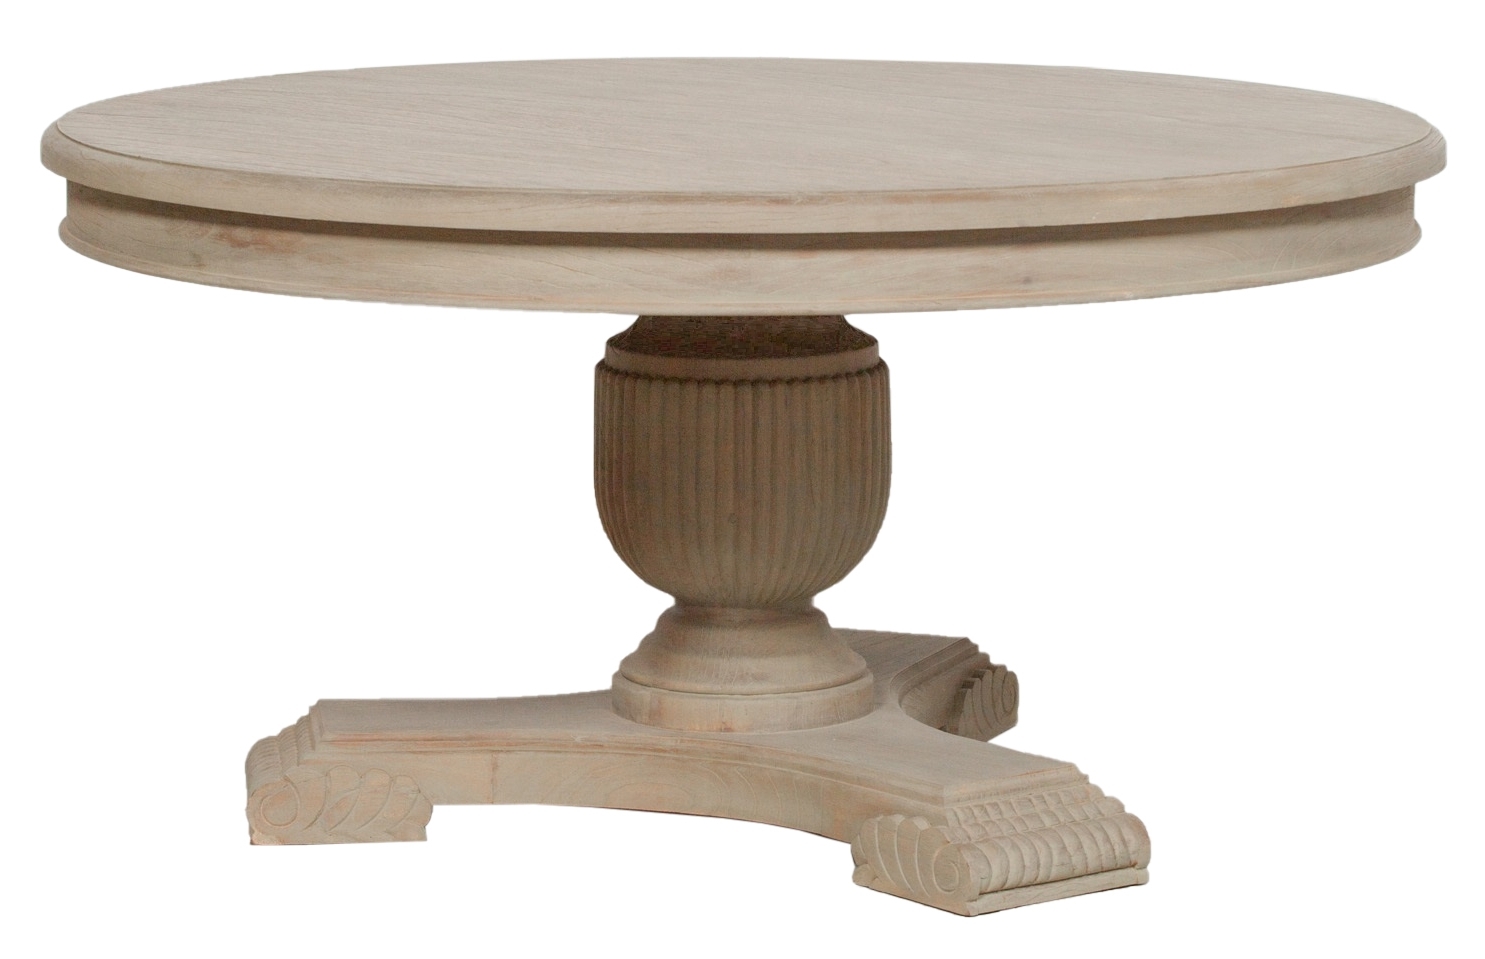 Rustic White Cedar 6 To 8 Seater Round Pedestal Dining Table 150cm